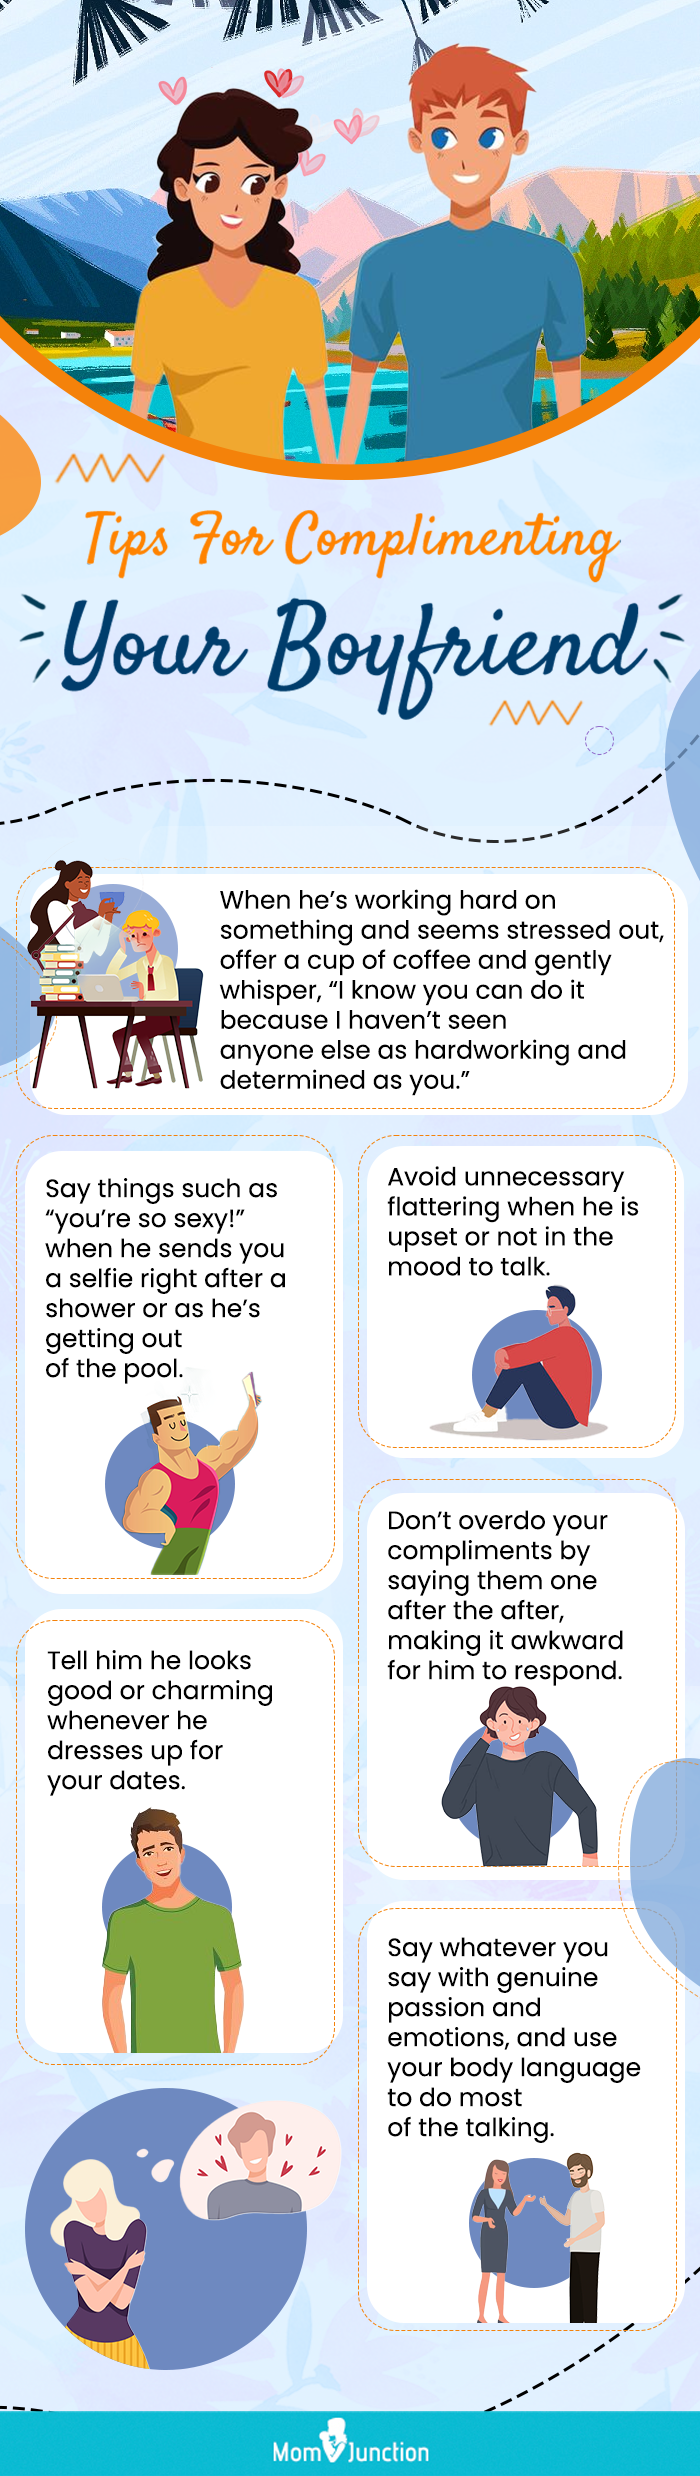 ways to shower him with cute words [infographic]